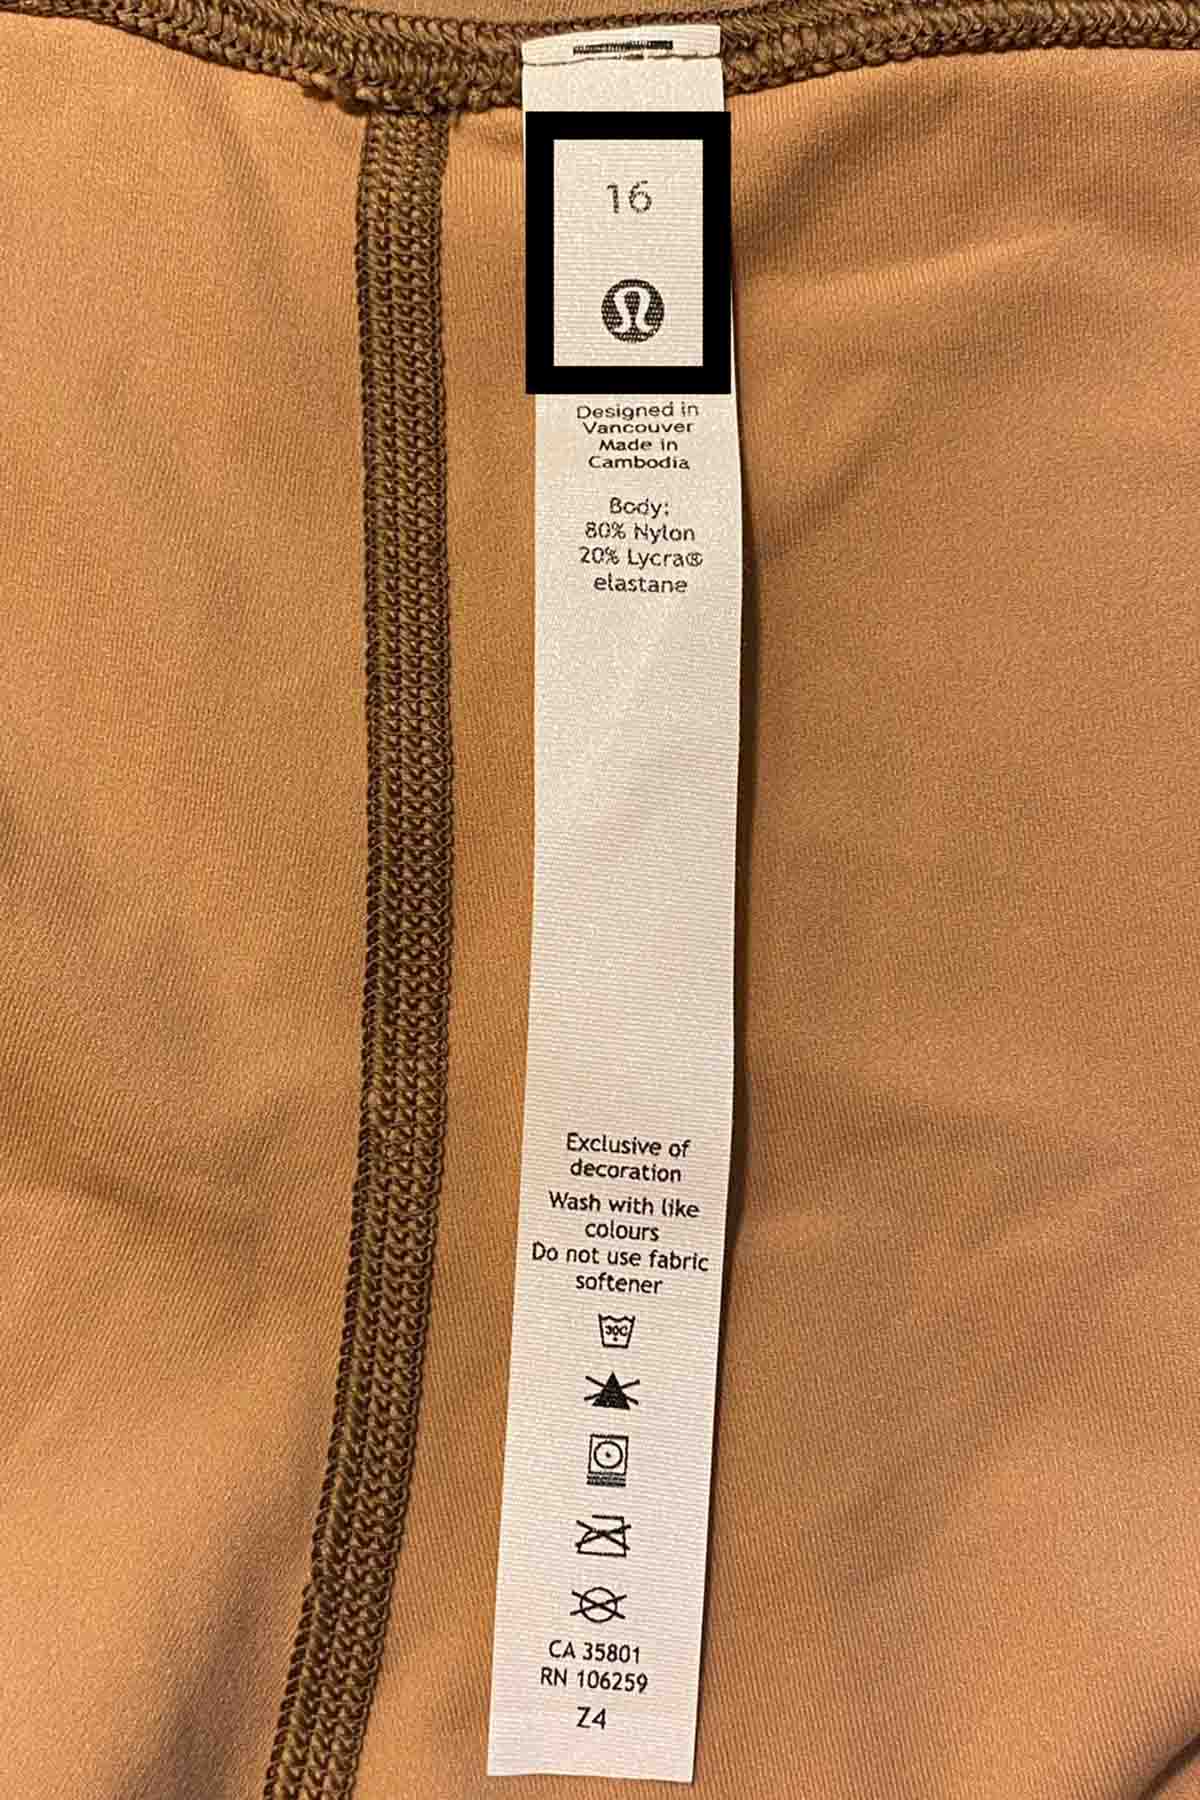 a lululemon rip tag with a black box around the size and logo.